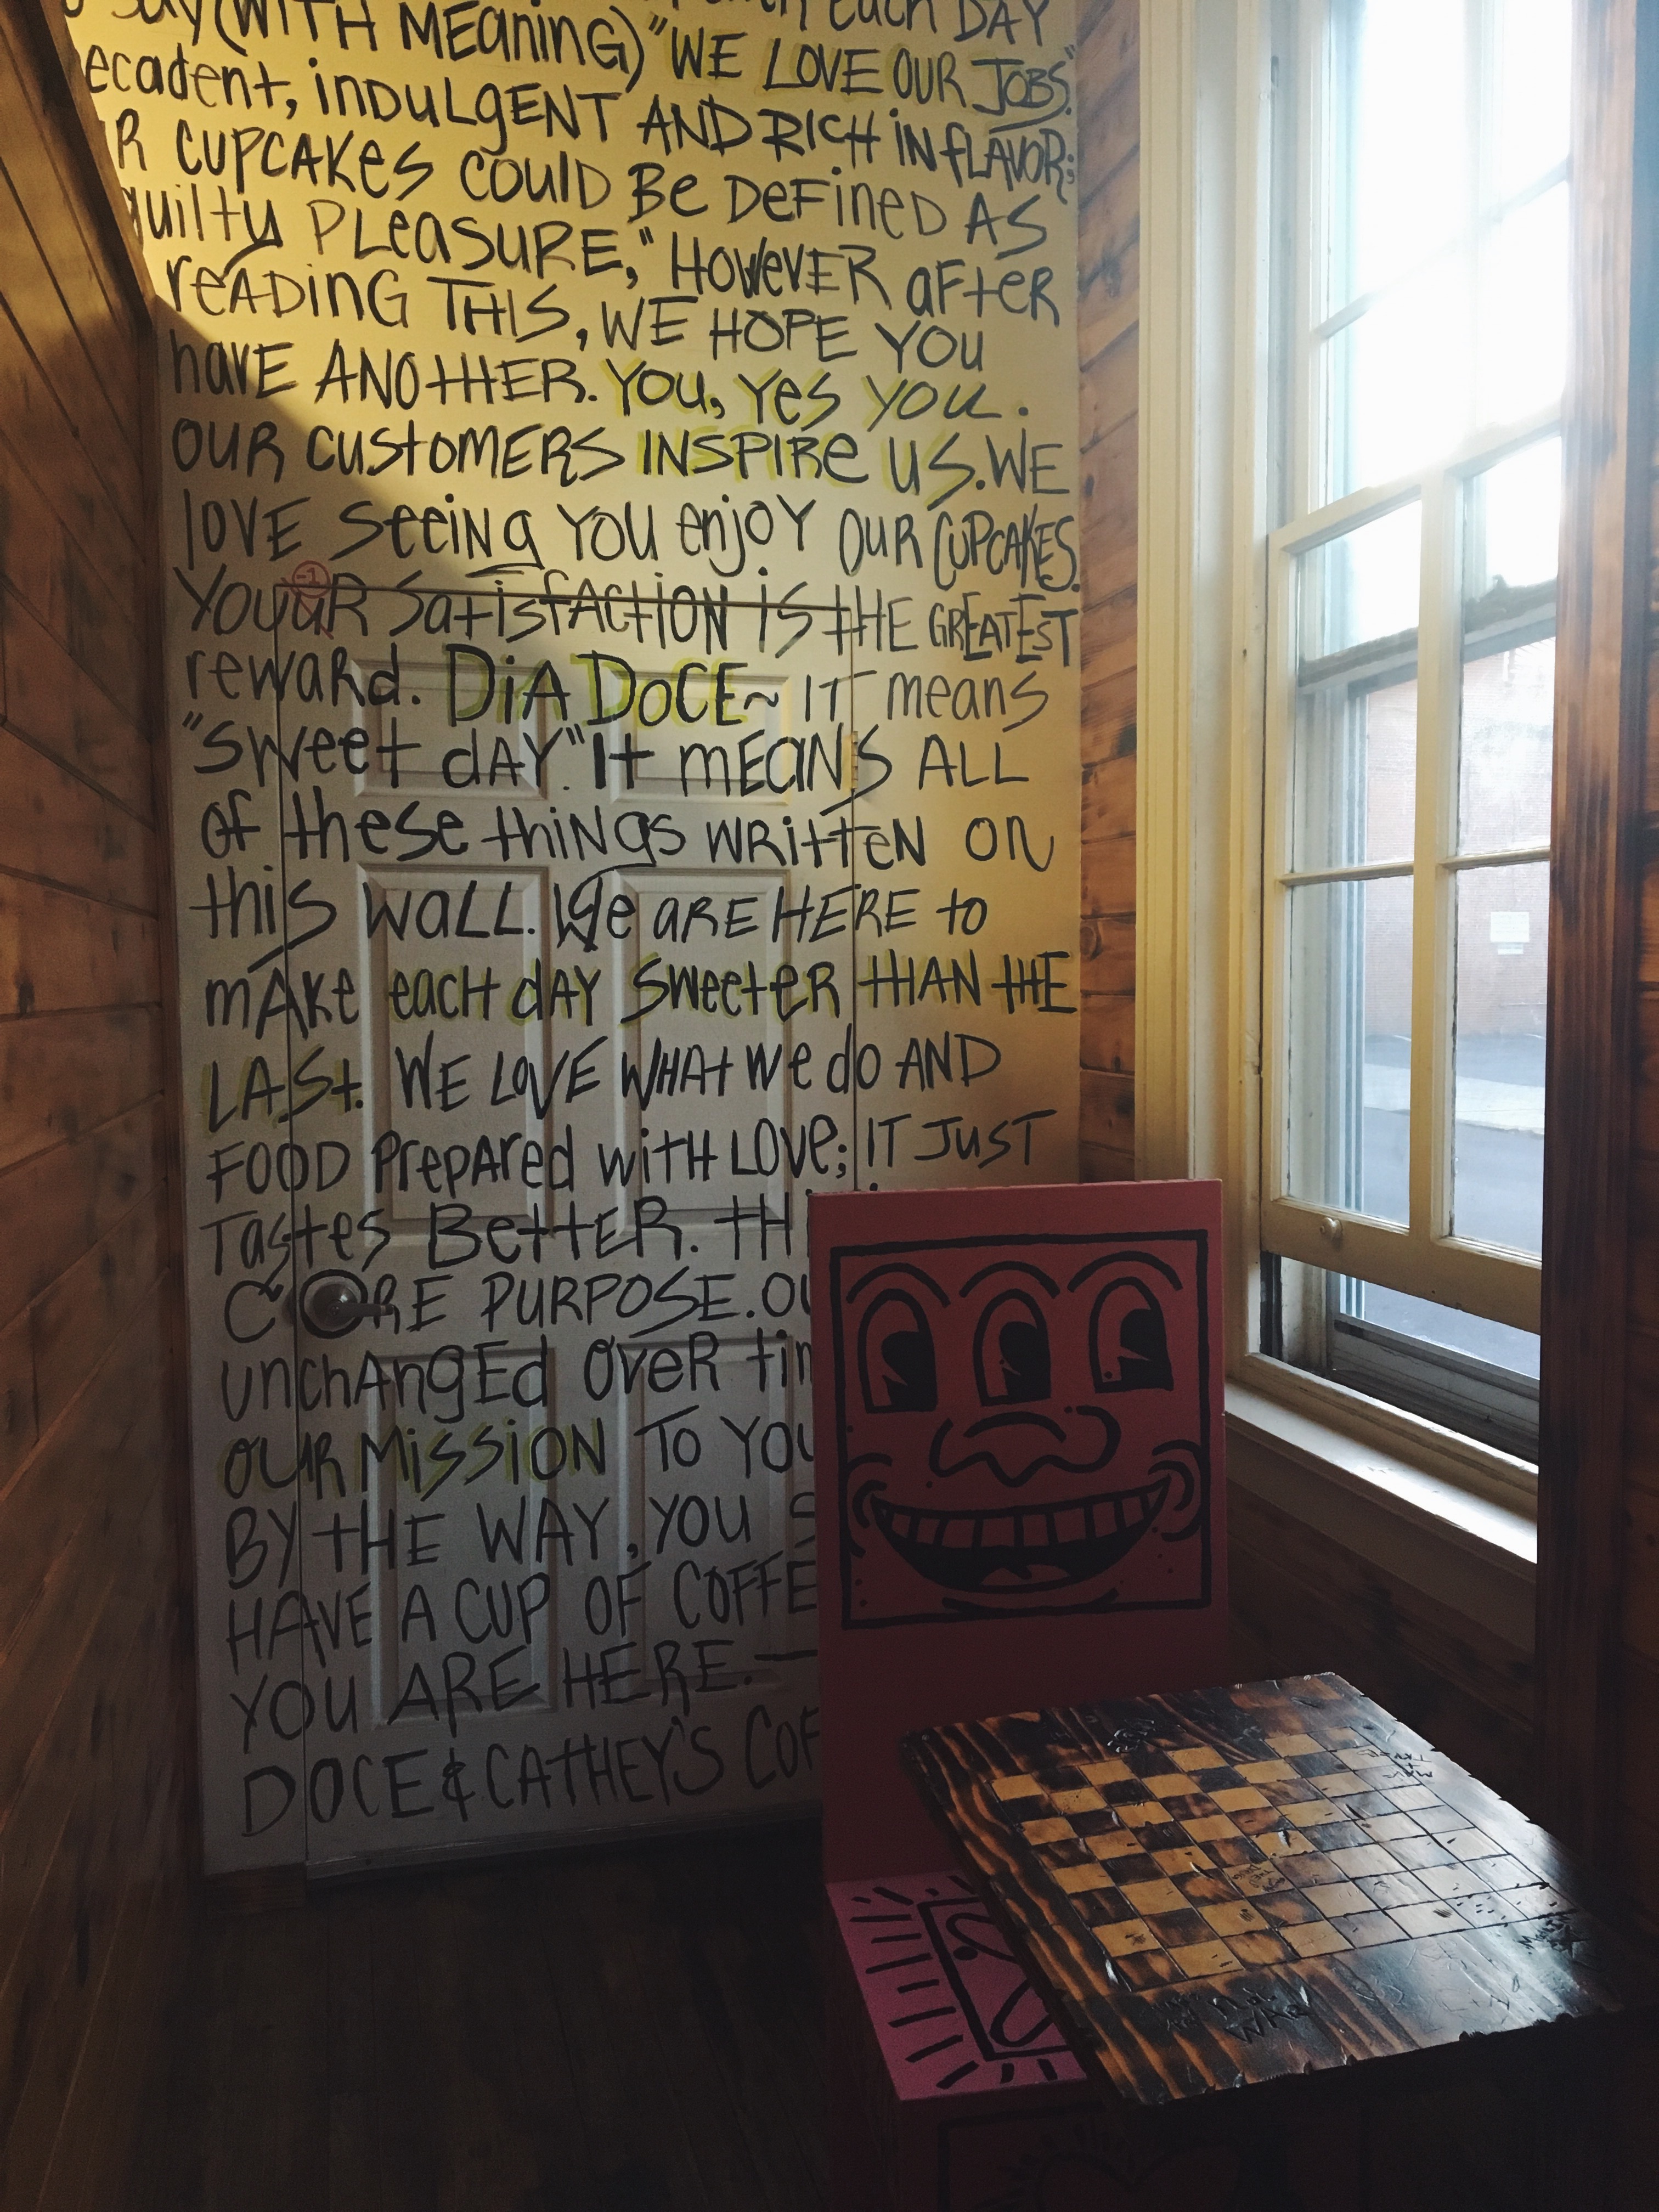 West Chester study spots: a smiling chair sits in front of a word-filled wall inside the coffee and cupcake shop Dia Doce, located on High Street